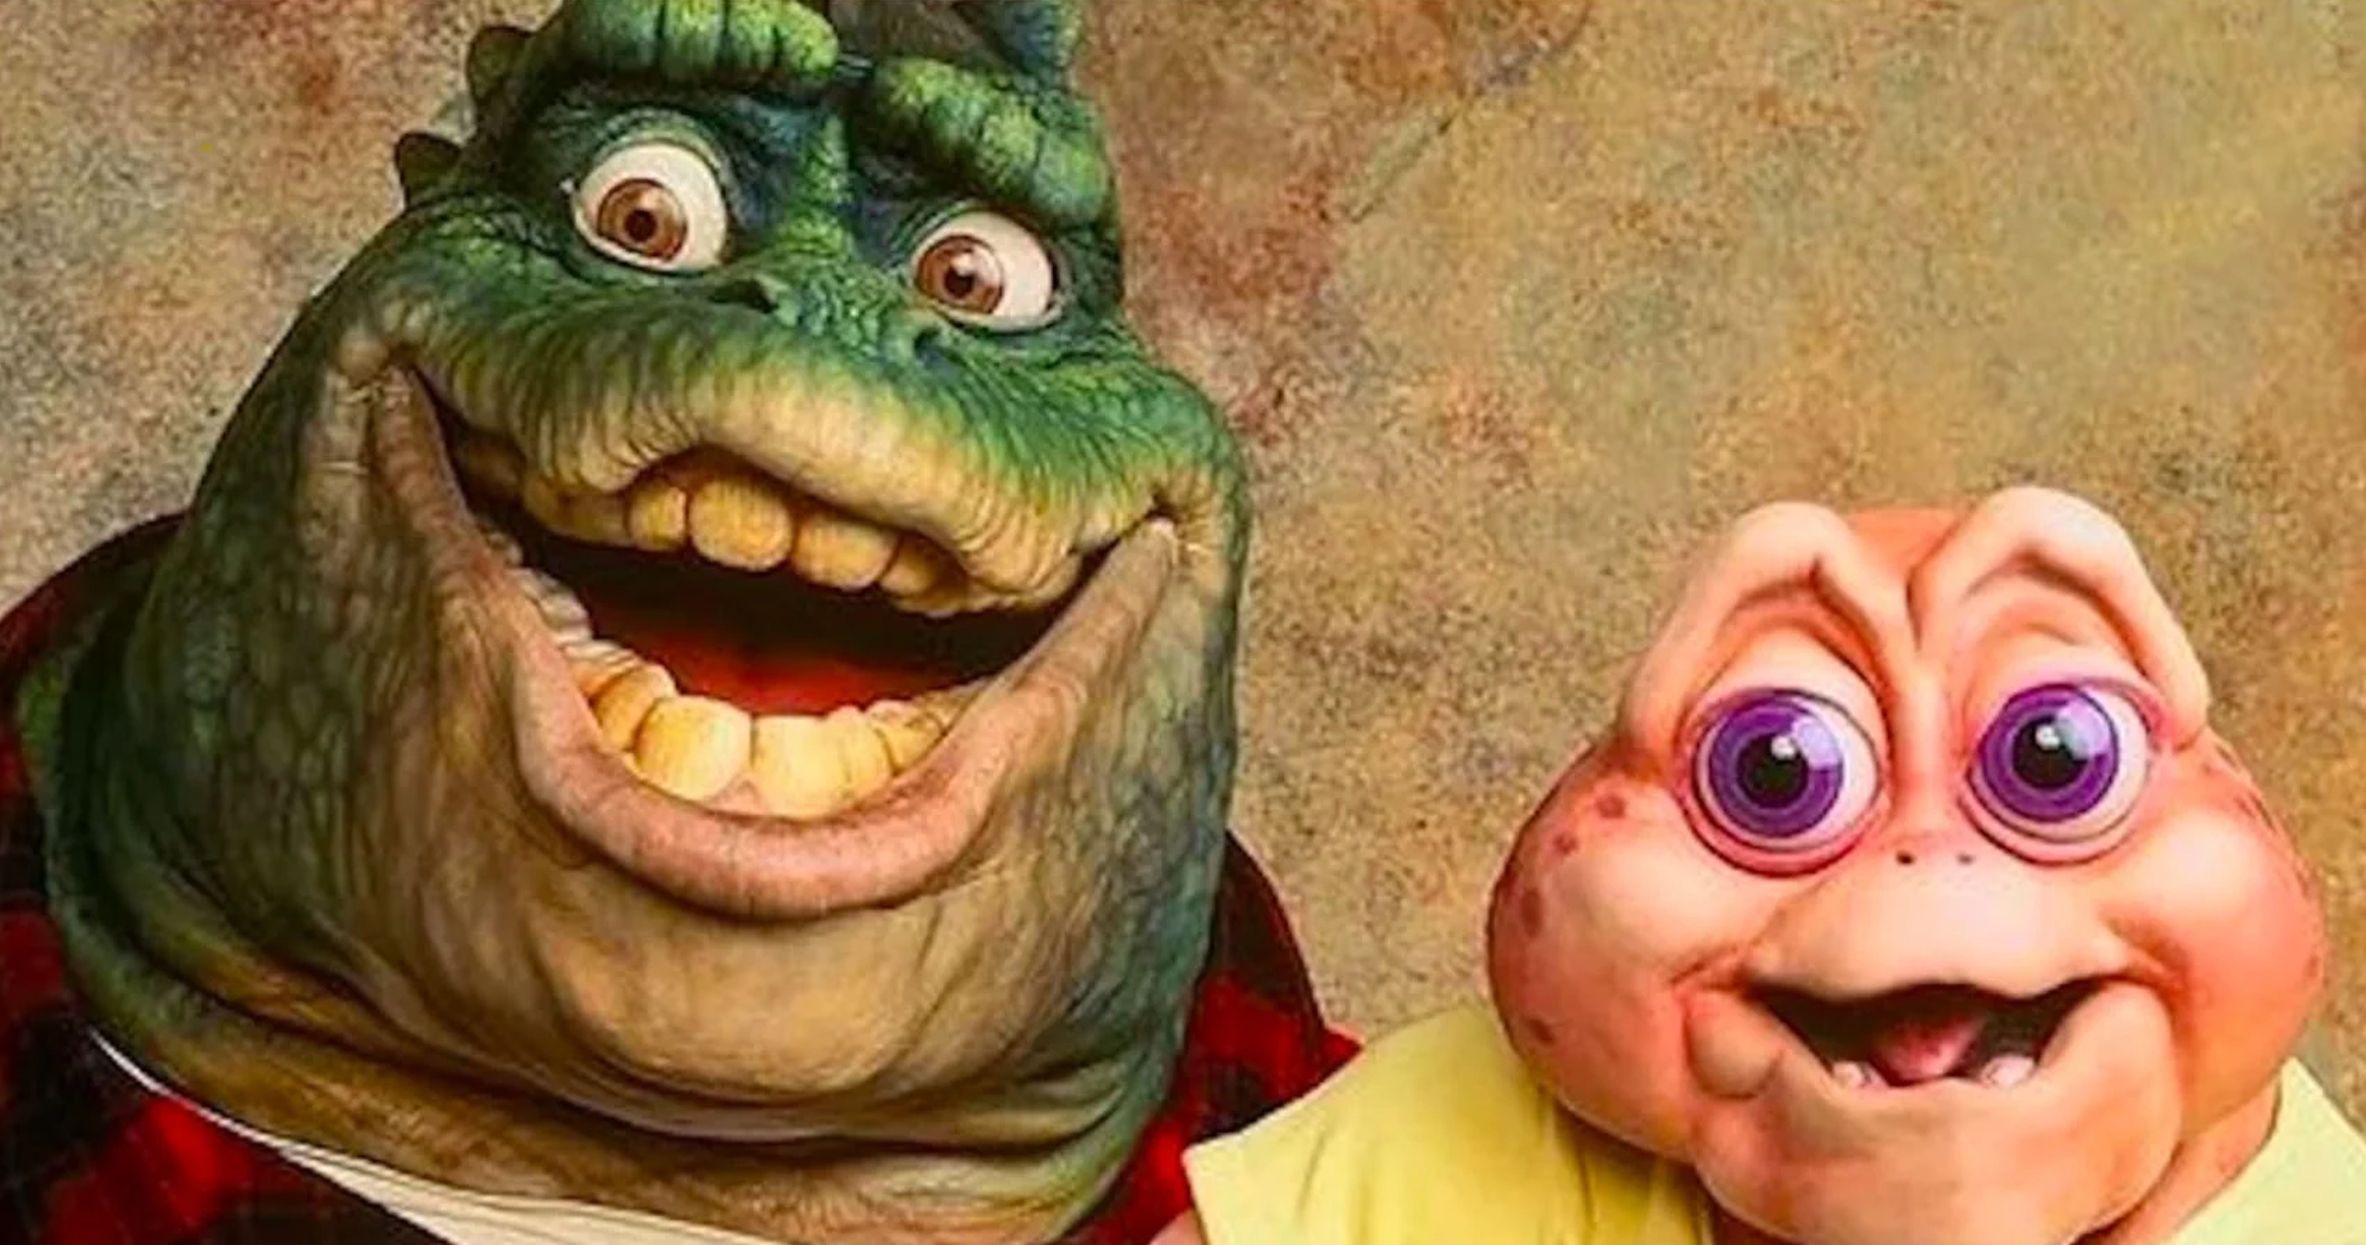 Dinosaurs the Complete Series Is Now Streaming on Disney+